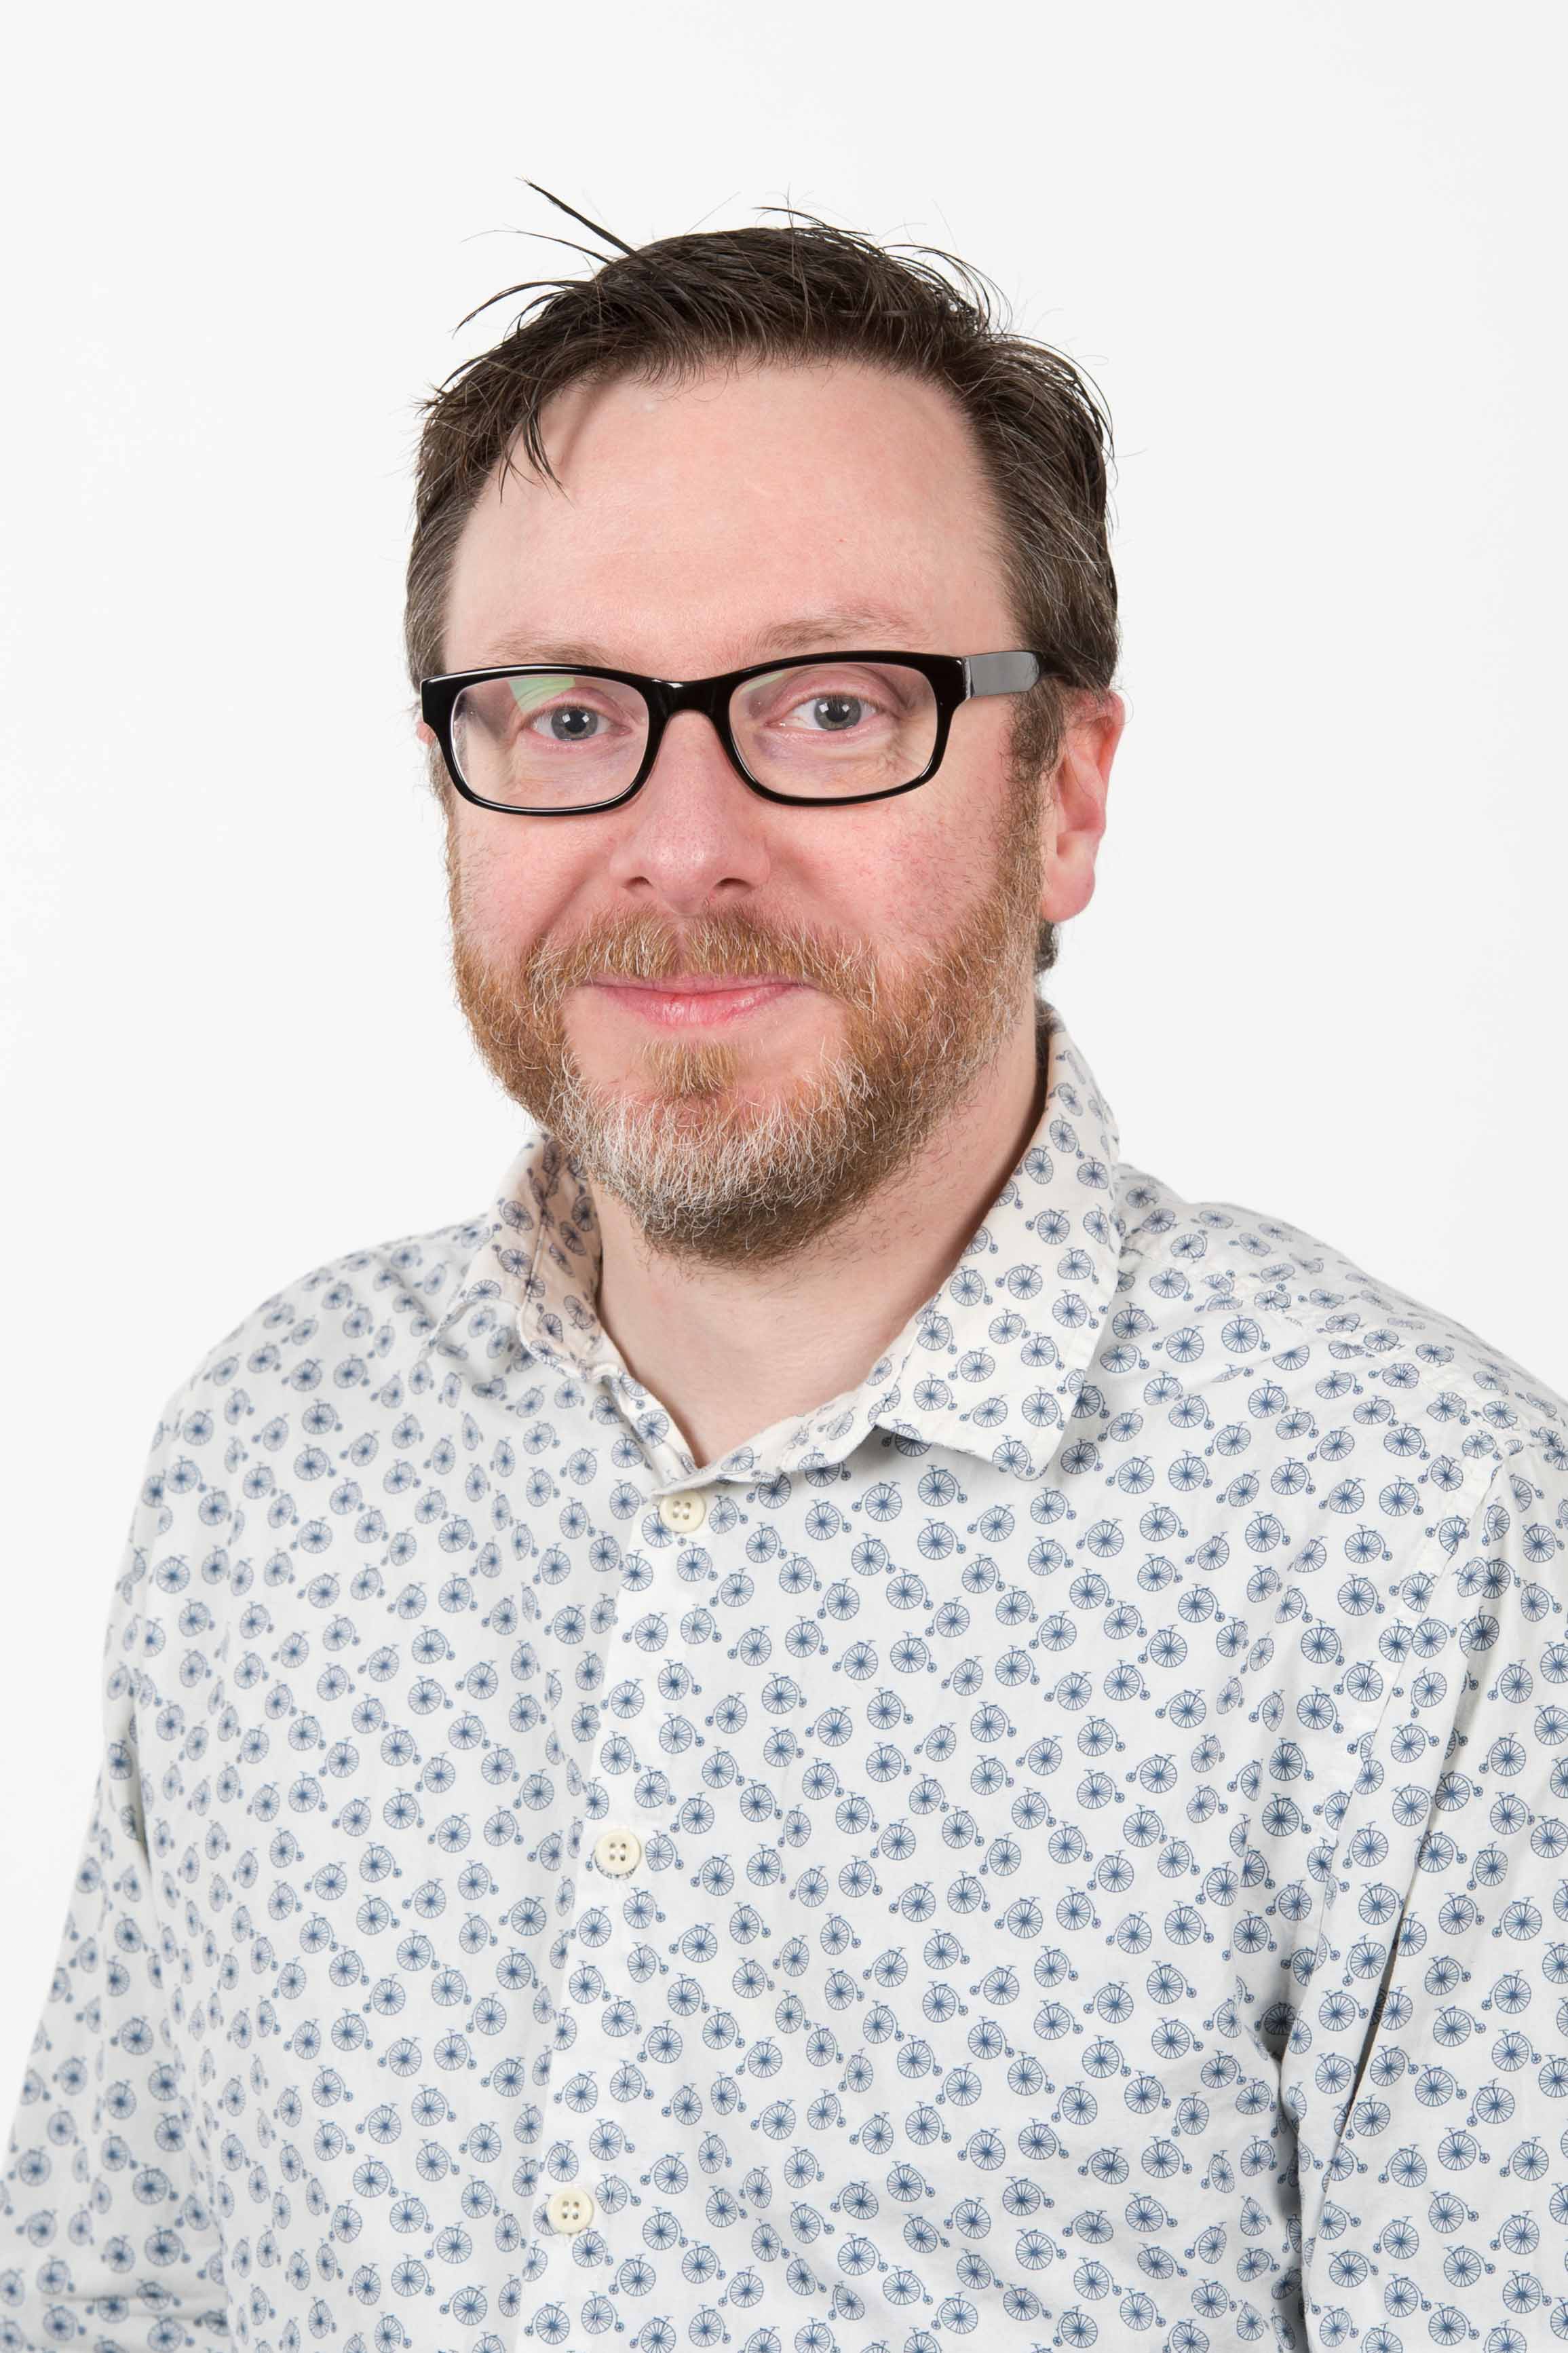 photo of Chris Lindsay, a middle-aged white man with short brwon hair and short ginger beard, wearing dark-rimmed square glasses and a white shirt with small print of unicycles